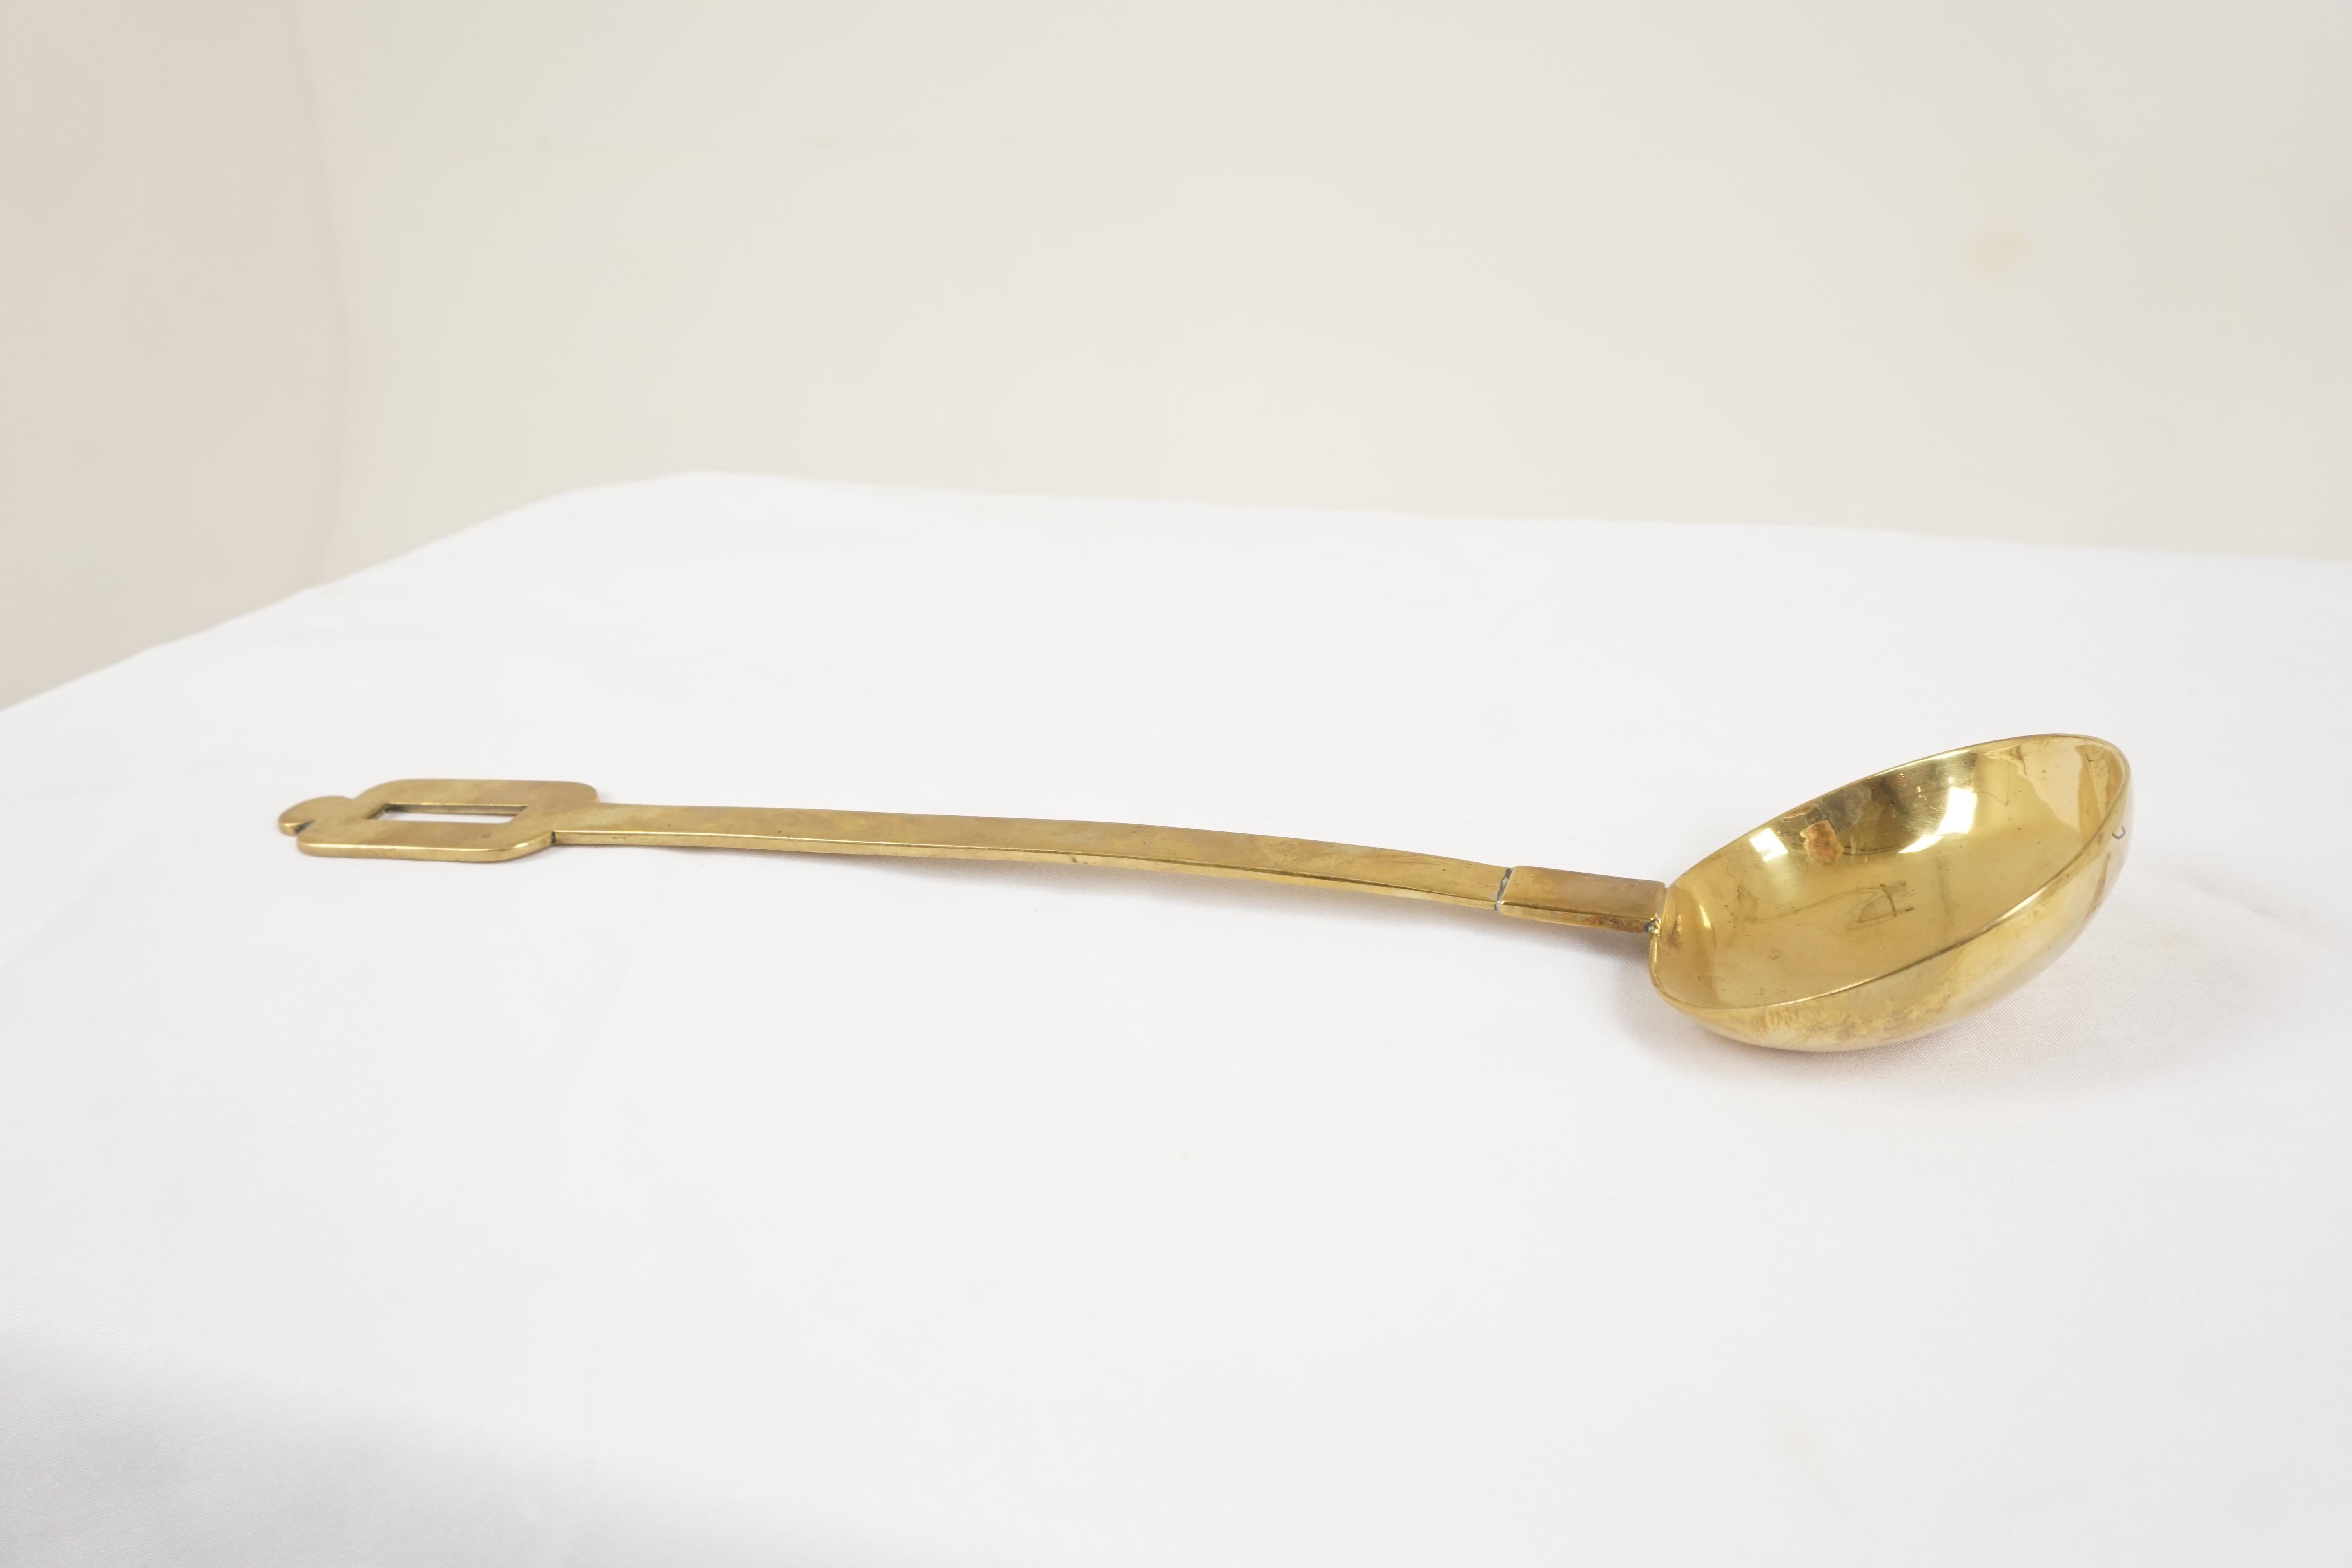 Hand-Crafted Antique Brass Ladle, Victorian, Country House Kitchen, Scotland, 1880